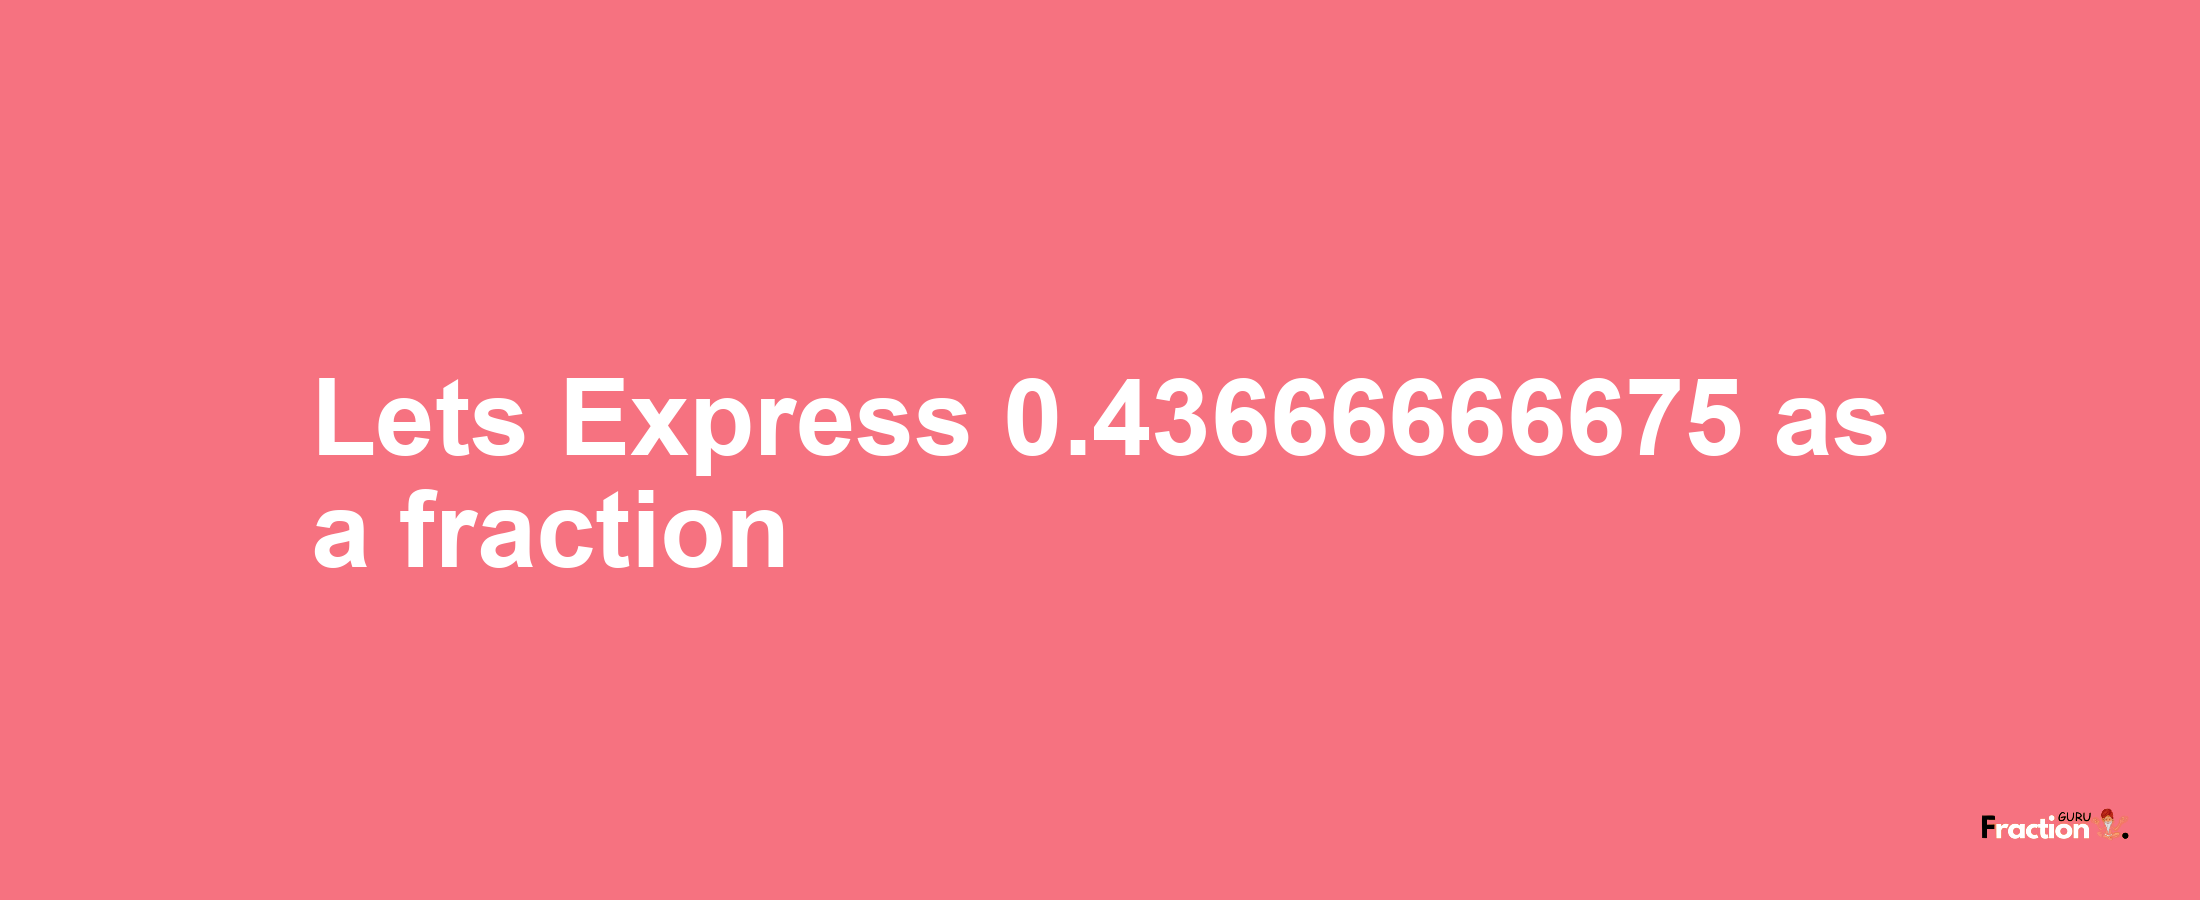 Lets Express 0.43666666675 as afraction